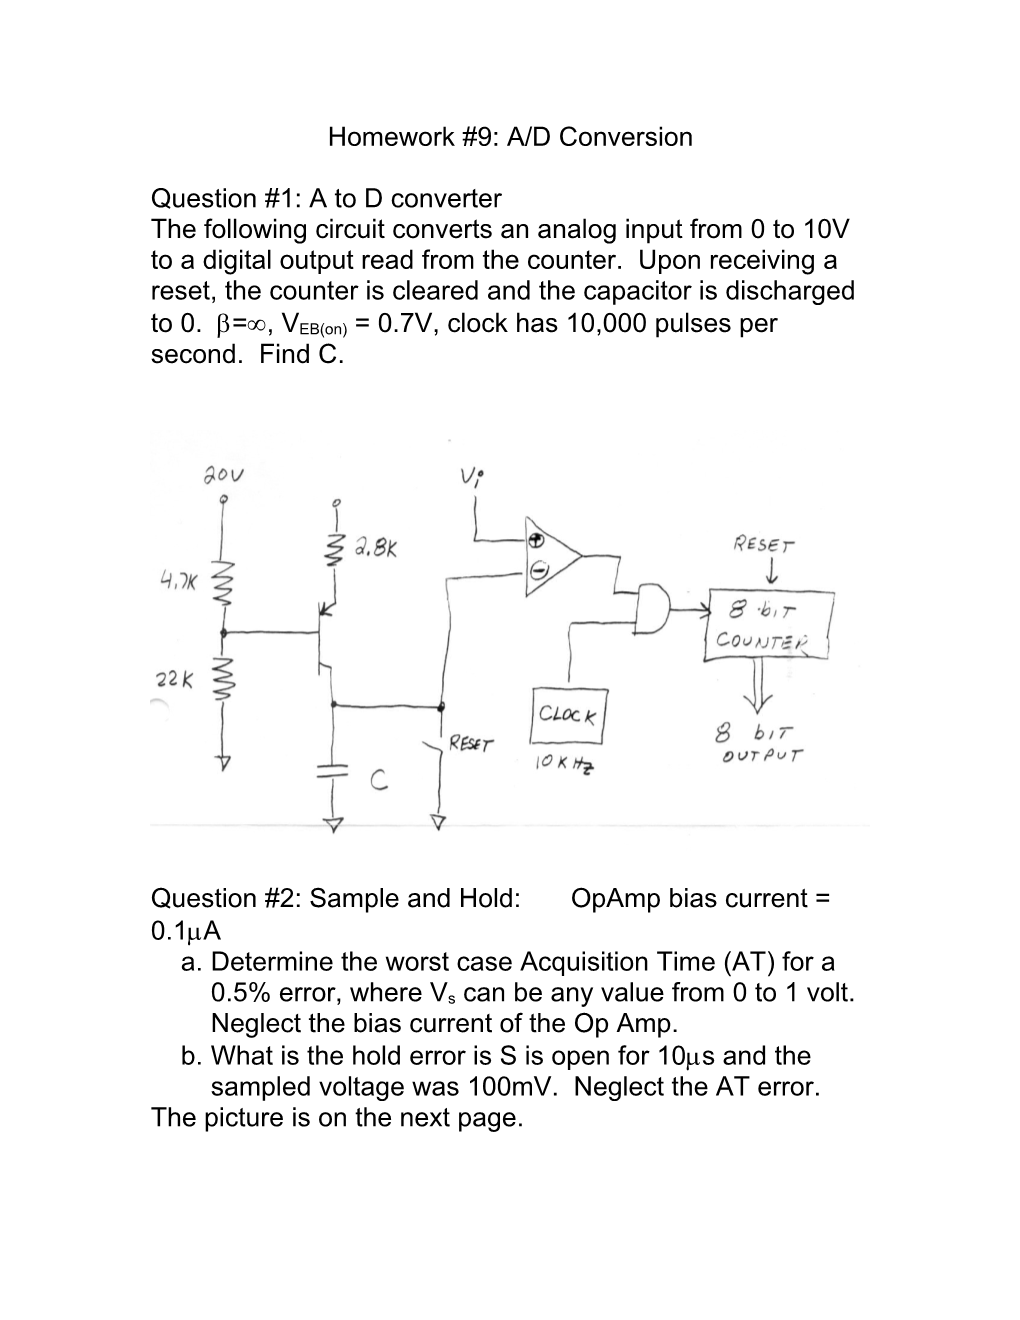 Question #2: Sample and Hold: Opamp Bias Current = 0.1Ma